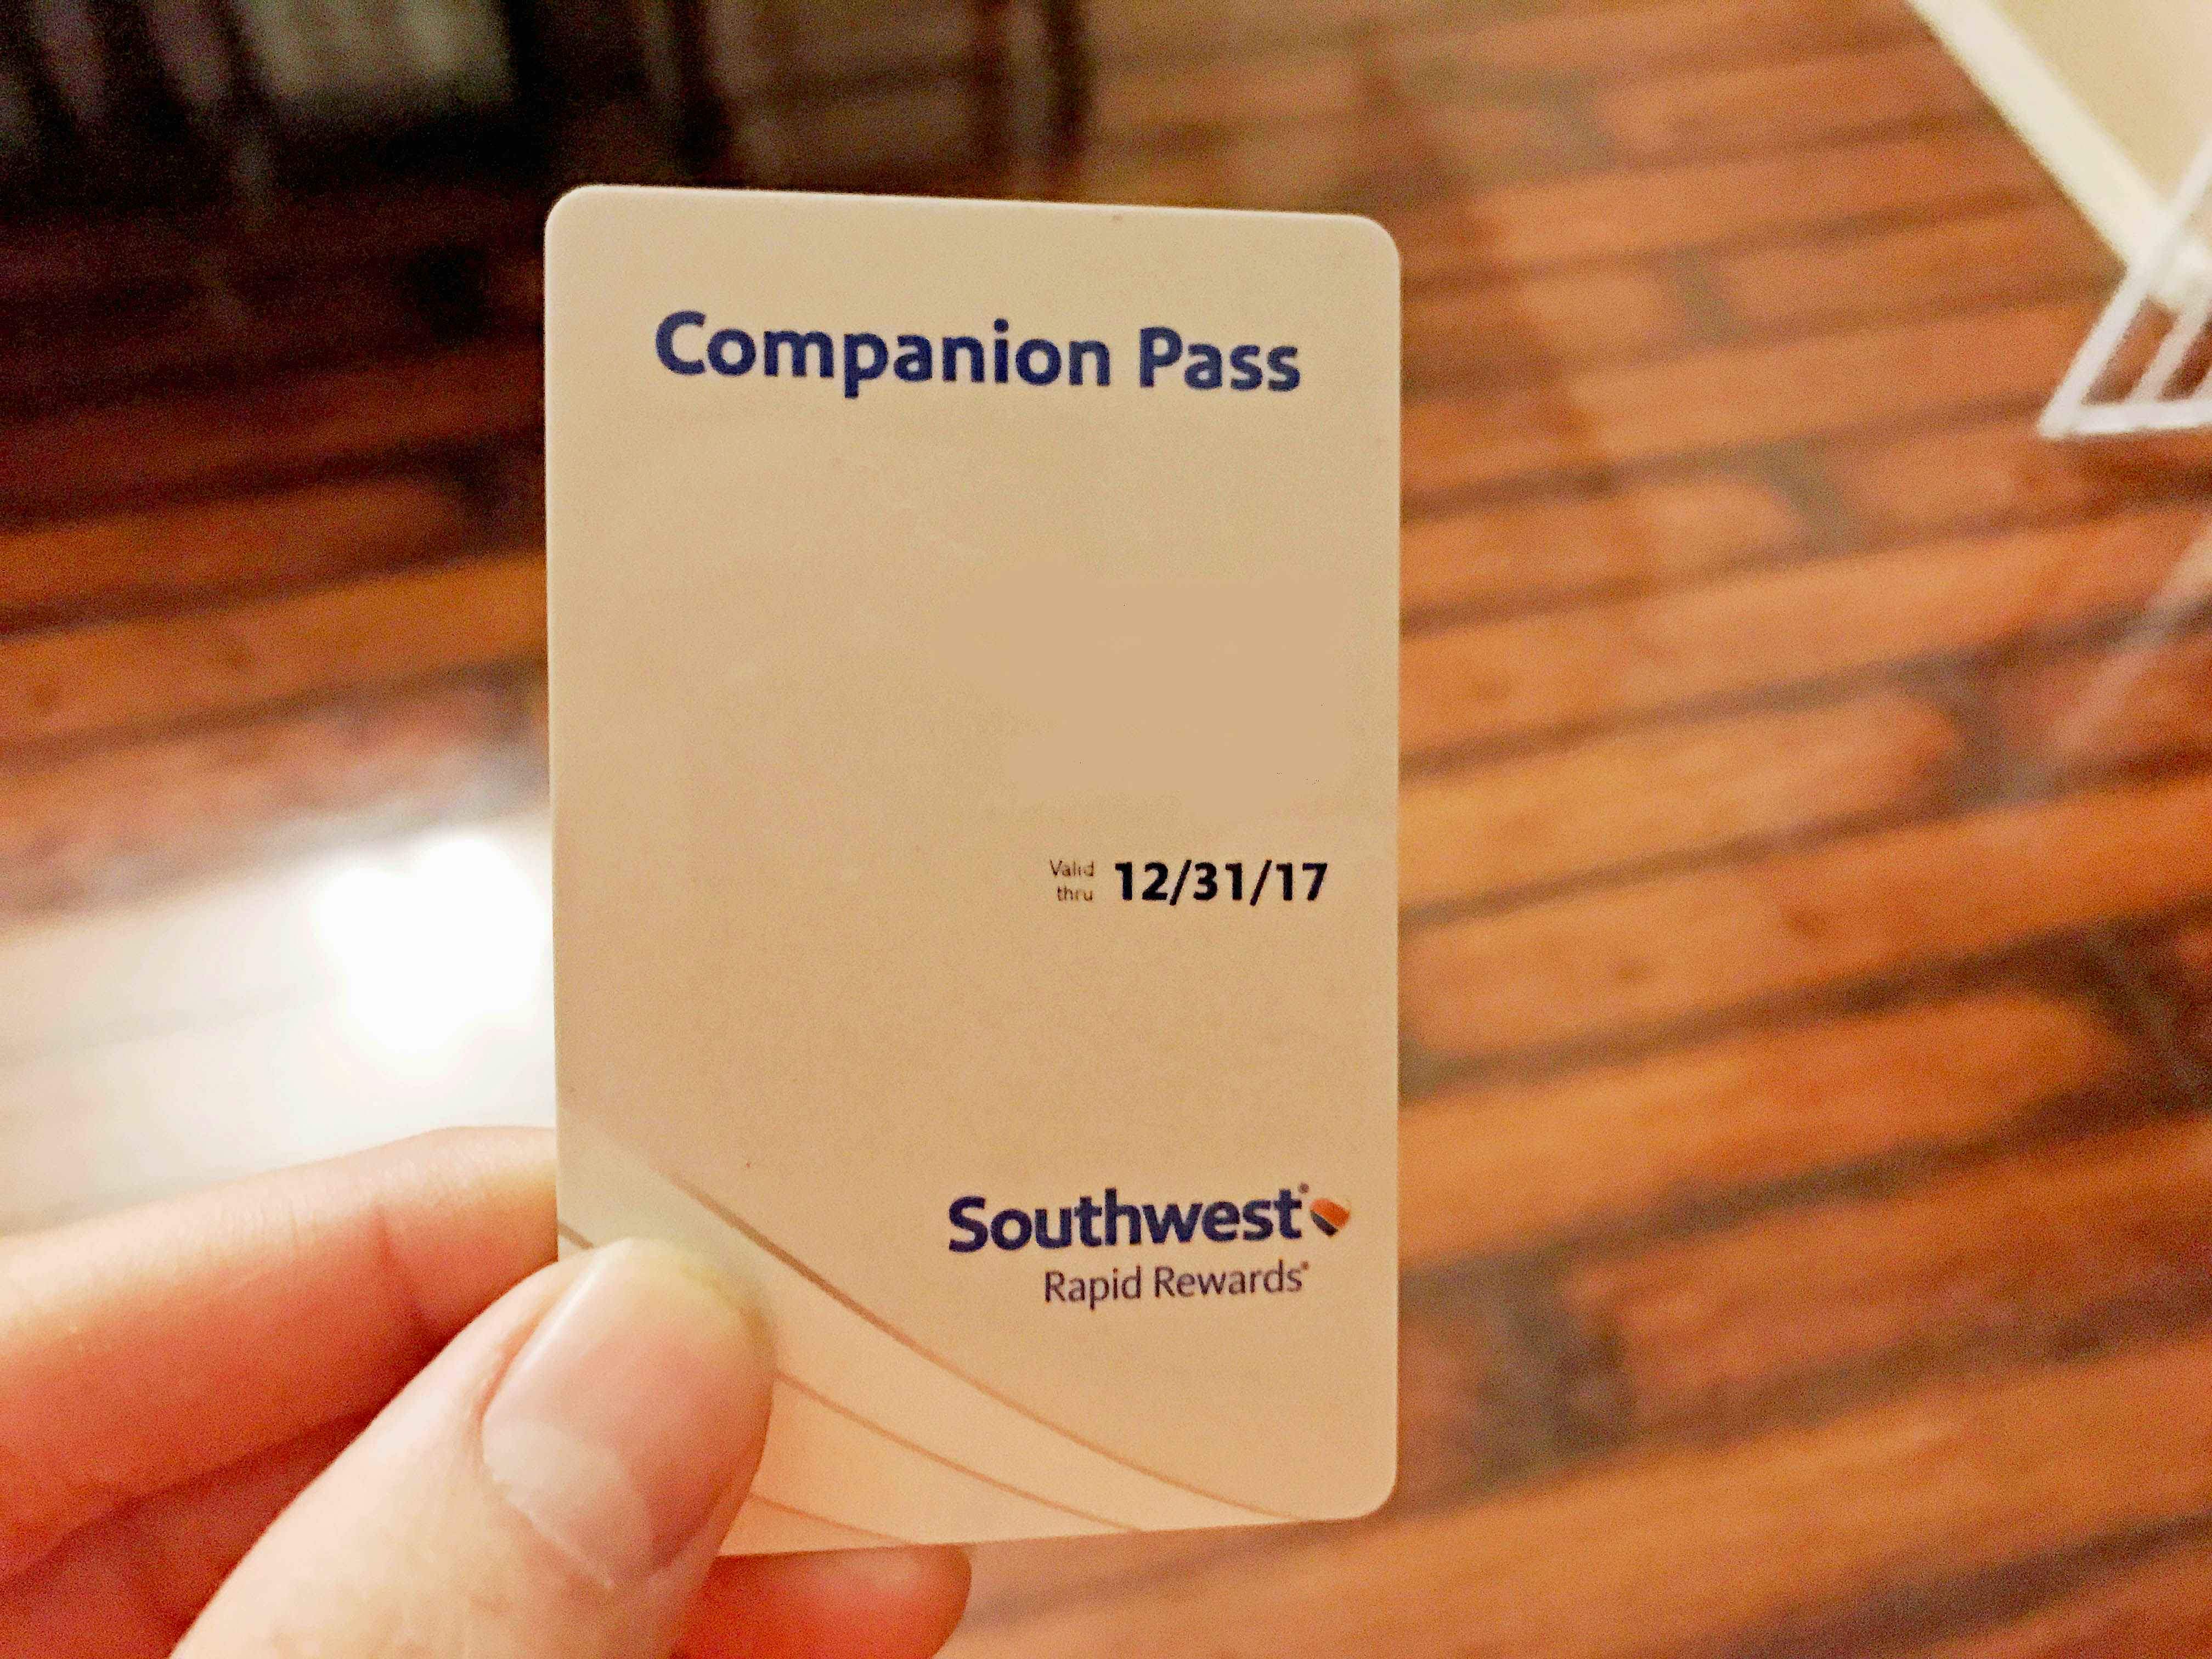 Pay for everything with Southwest Airlines credit cards and get a free honeymoon flight for your new spouse.